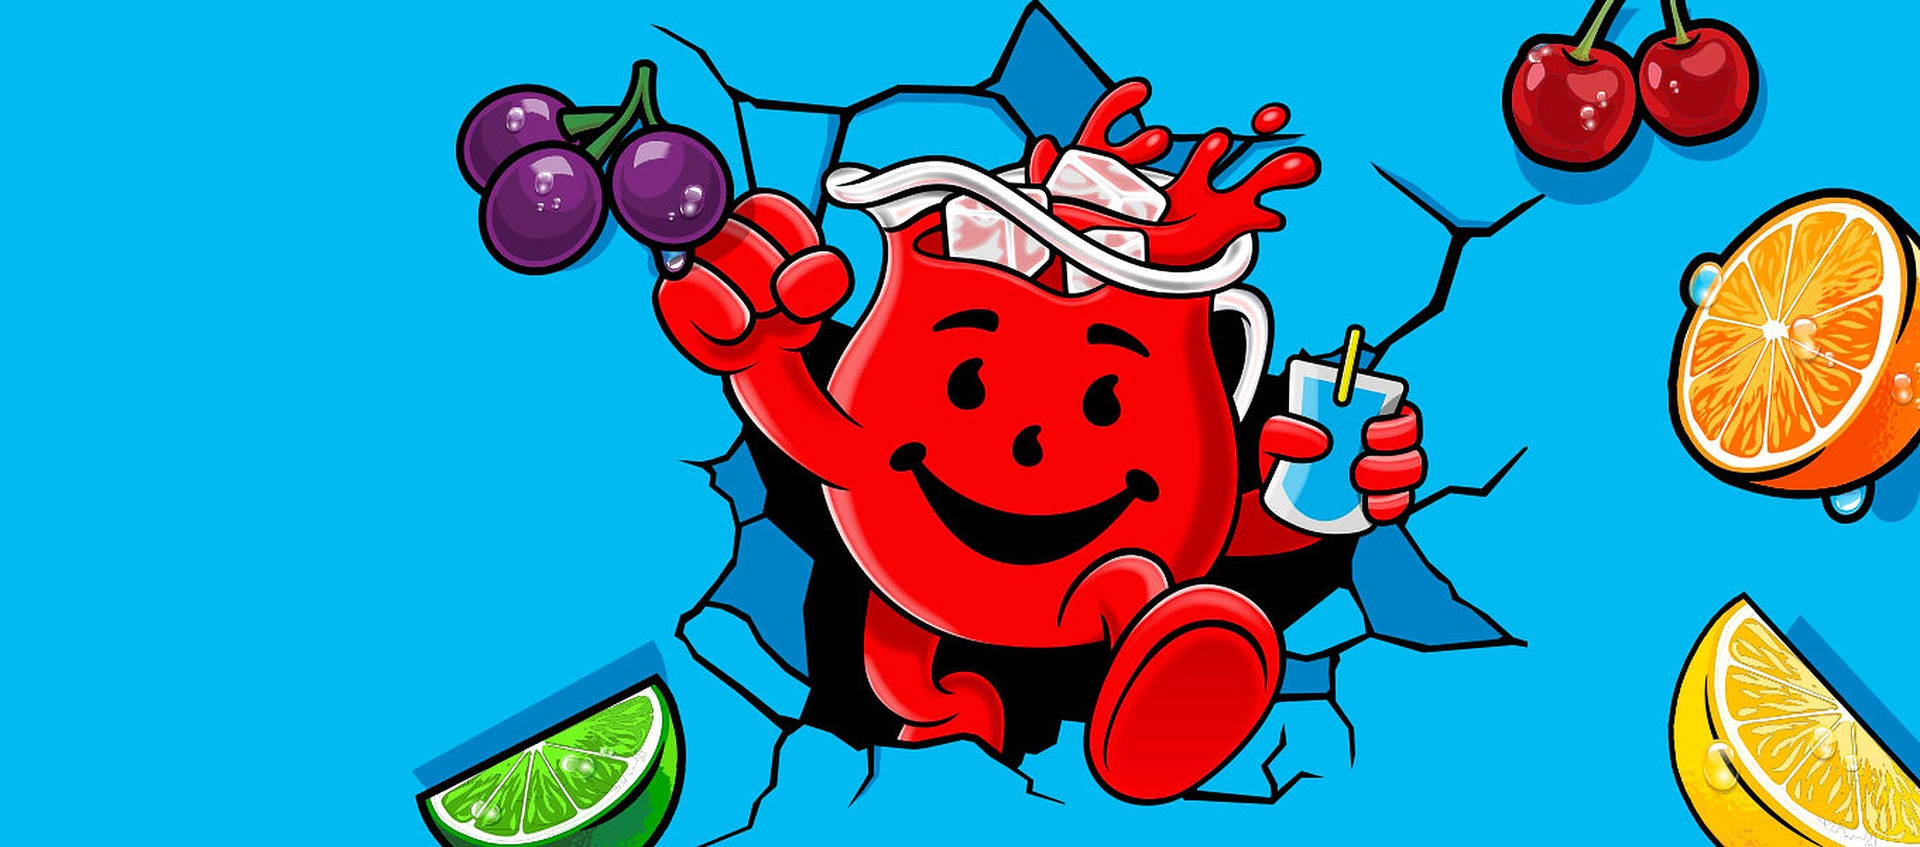 Kool-aid Man, The Iconic Drink Mascot, Surrounded By Assortment Of Fruits Background